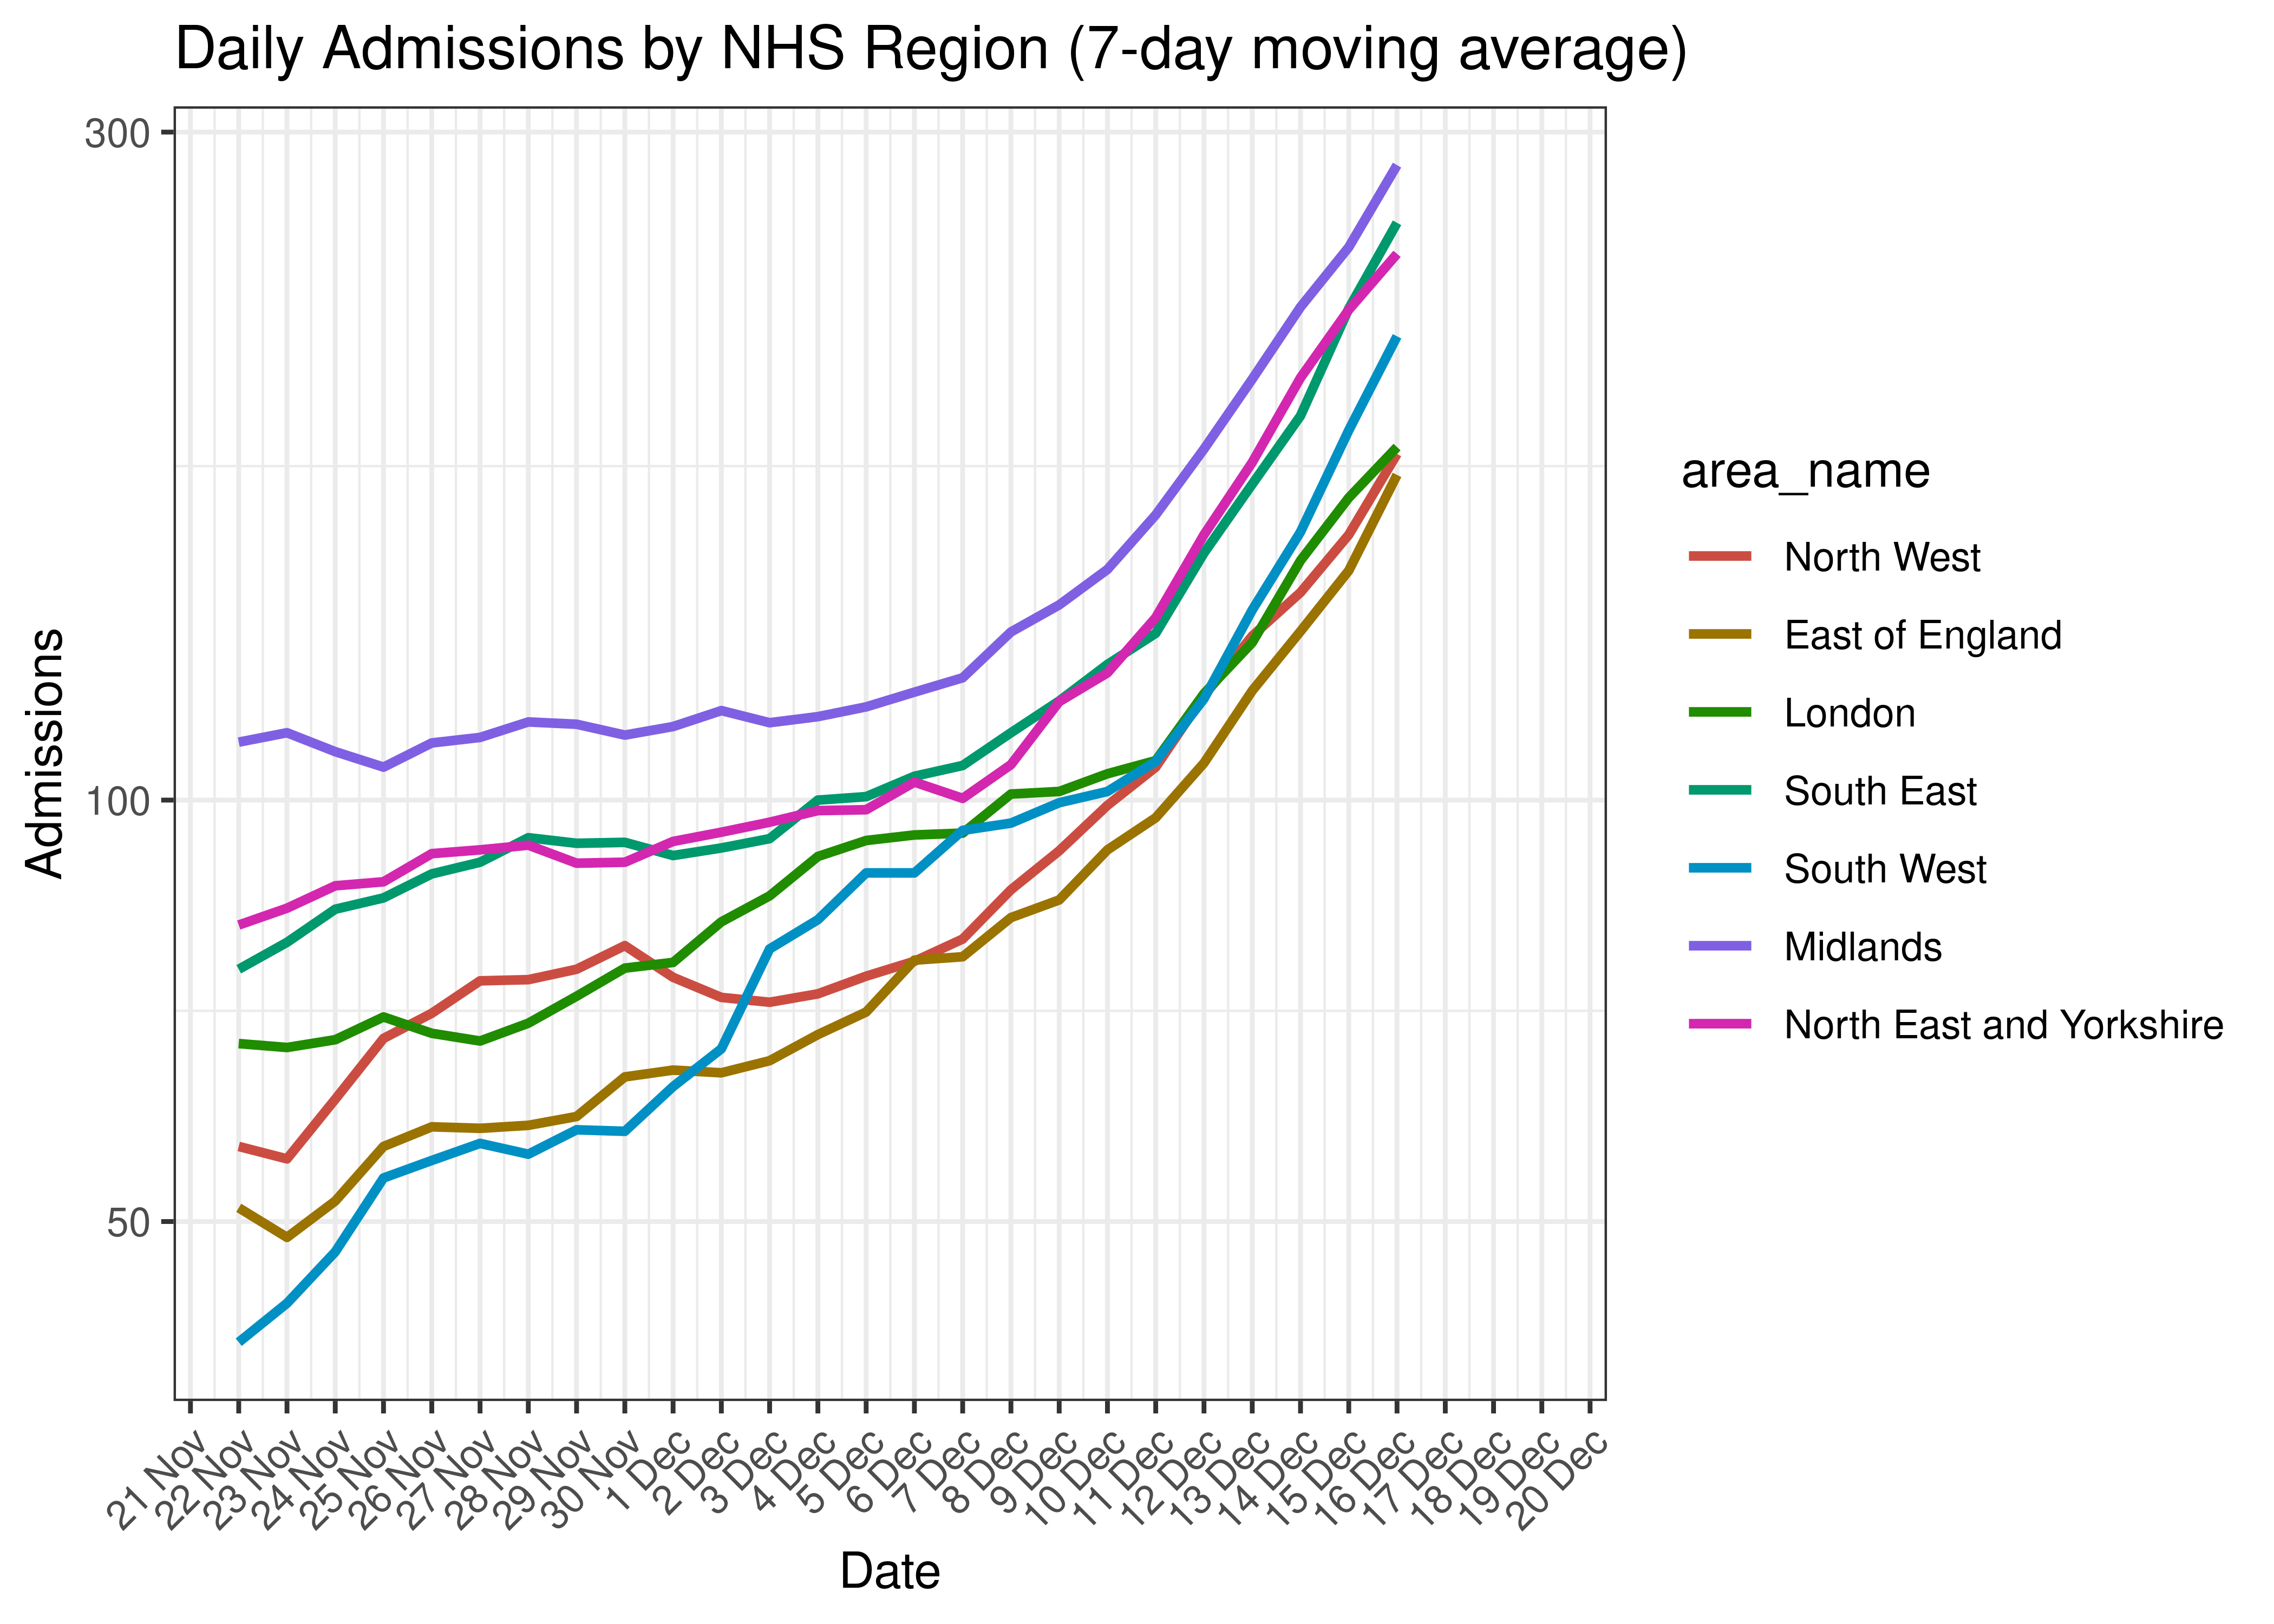 Daily Admissions by NHS Region for Last 30-days (7-day moving average)